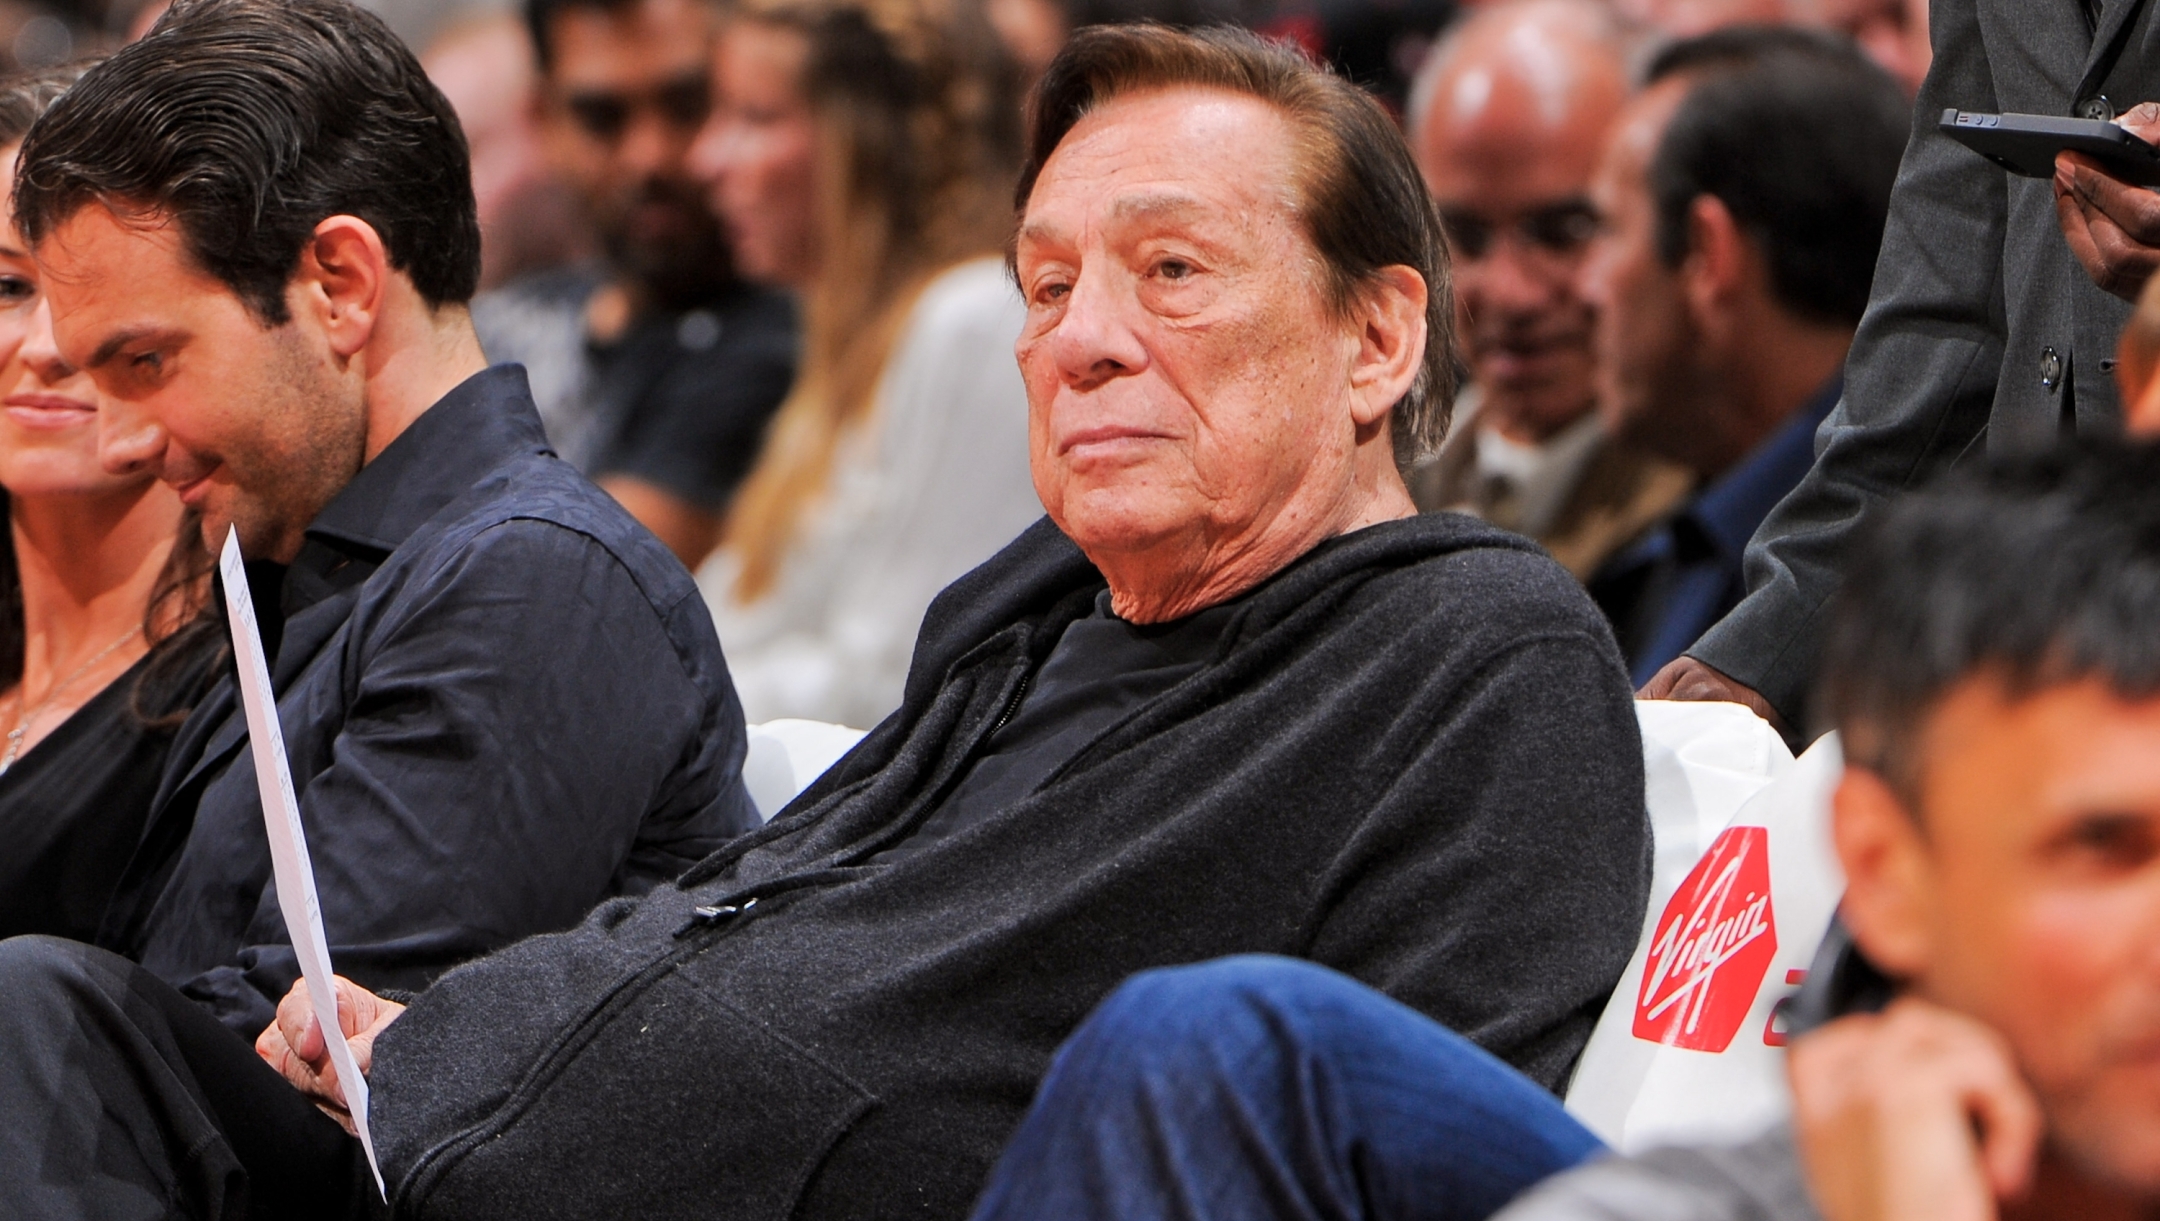 LOS ANGELES, CA - APRIL 10: Donald Sterling, owner of the Los Angeles Clippers, looks on as his team plays against the Minnesota Timberwolves at Staples Center on April 10, 2013 in Los Angeles, California. NOTE TO USER: User expressly acknowledges and agrees that, by downloading and/or using this Photograph, user is consenting to the terms and conditions of the Getty Images License Agreement. Mandatory Copyright Notice: Copyright 2013 NBAE   Andrew D. Bernstein/NBAE via Getty Images/AFP (Photo by ANDREW D. BERNSTEIN / NBAE / Getty Images / Getty Images via AFP)